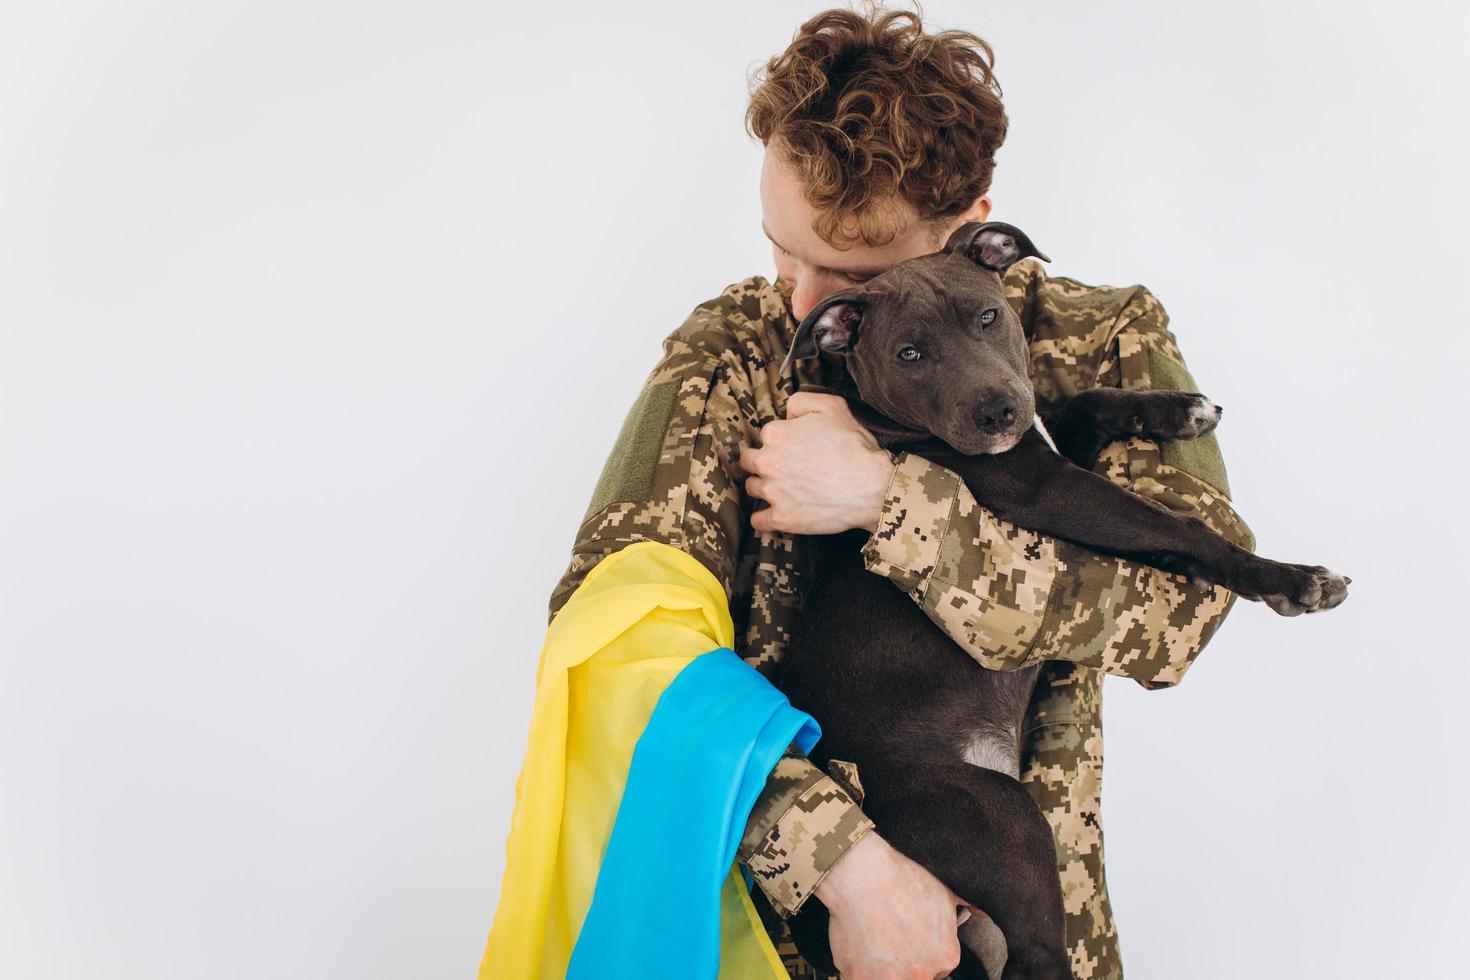 Ukrainian soldier in military uniform with a yellow and blue flag holds a dog in his arms on a white background photo